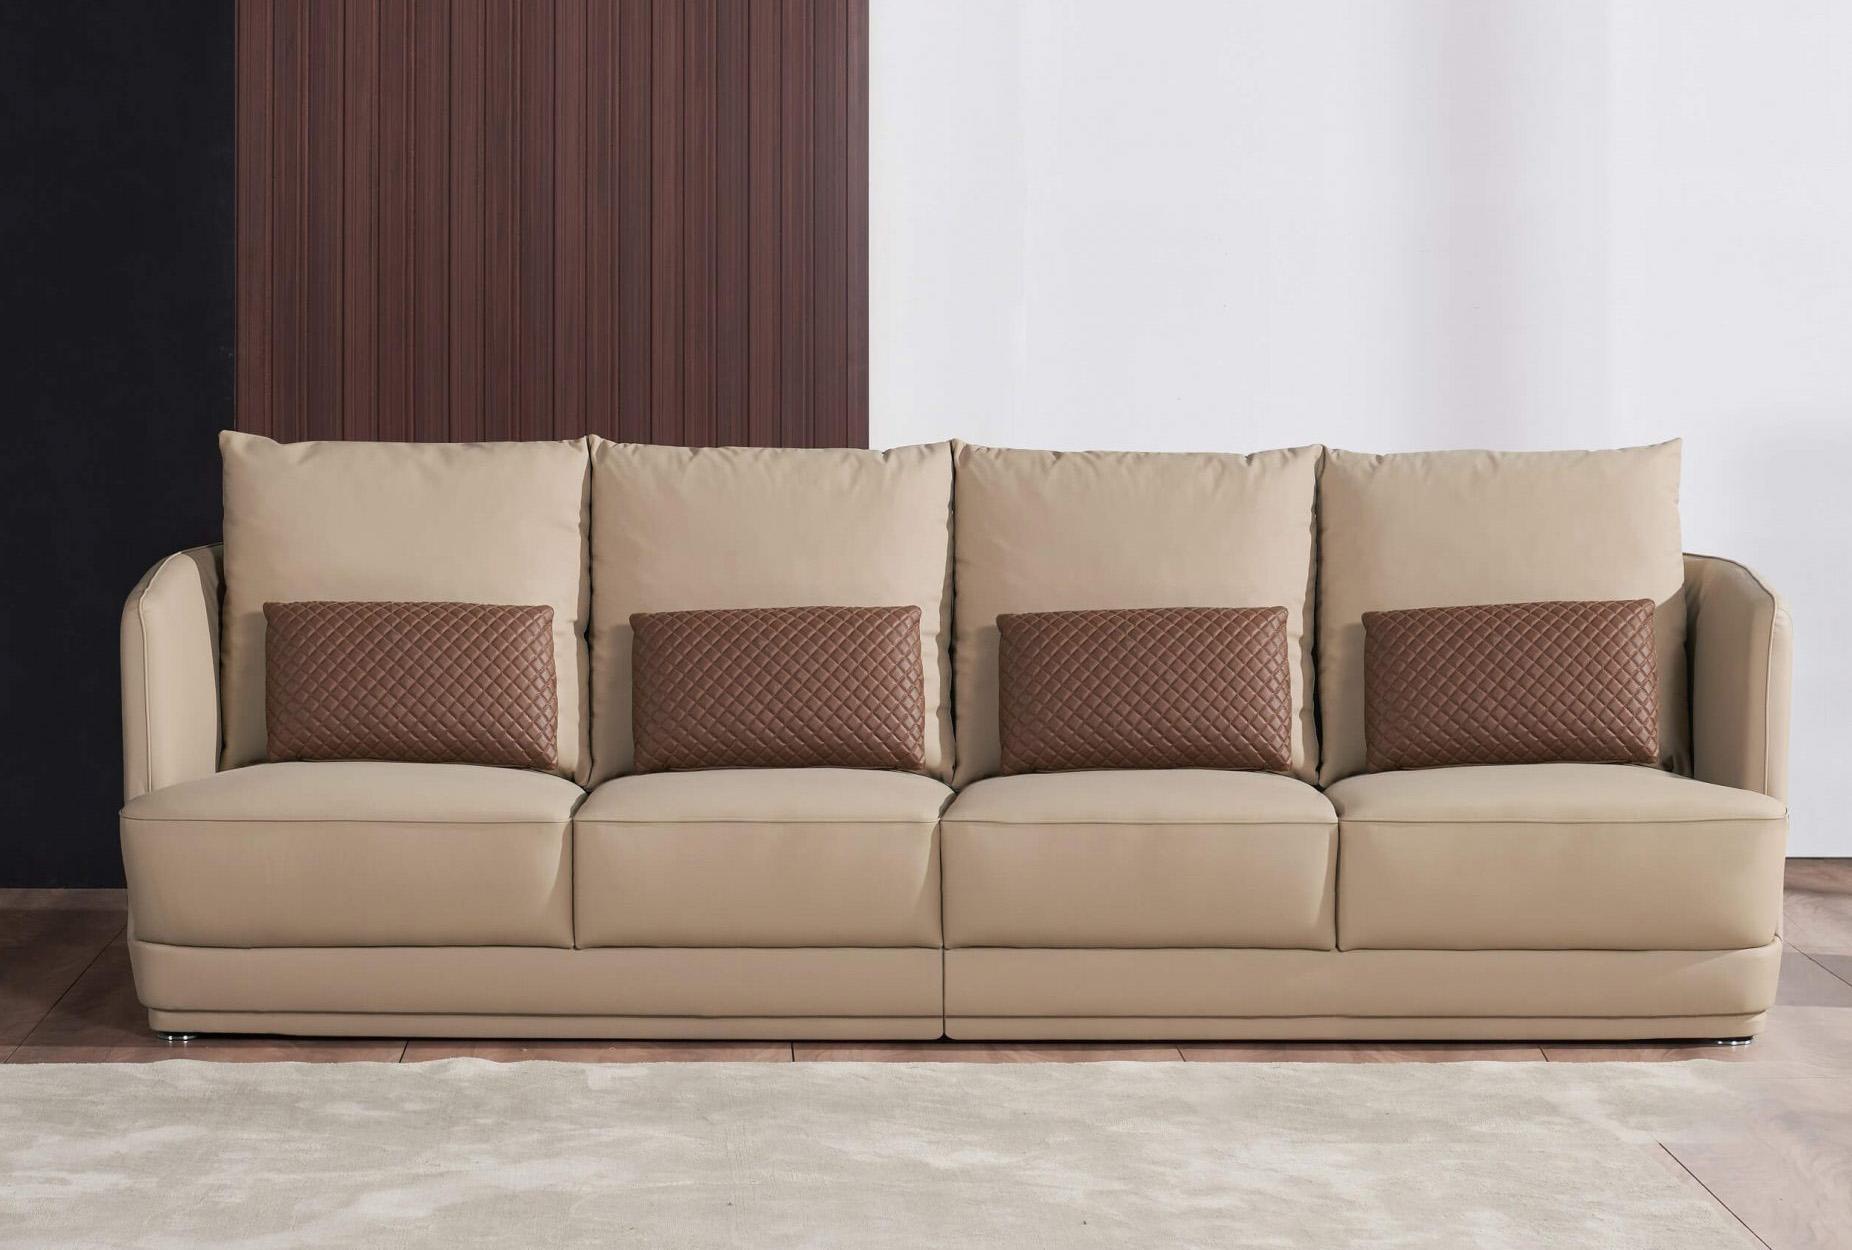 Modern, Vintage 4 Seater Sofa GLAMOUR EF-51617-4S in Tan, Brown Italian Leather